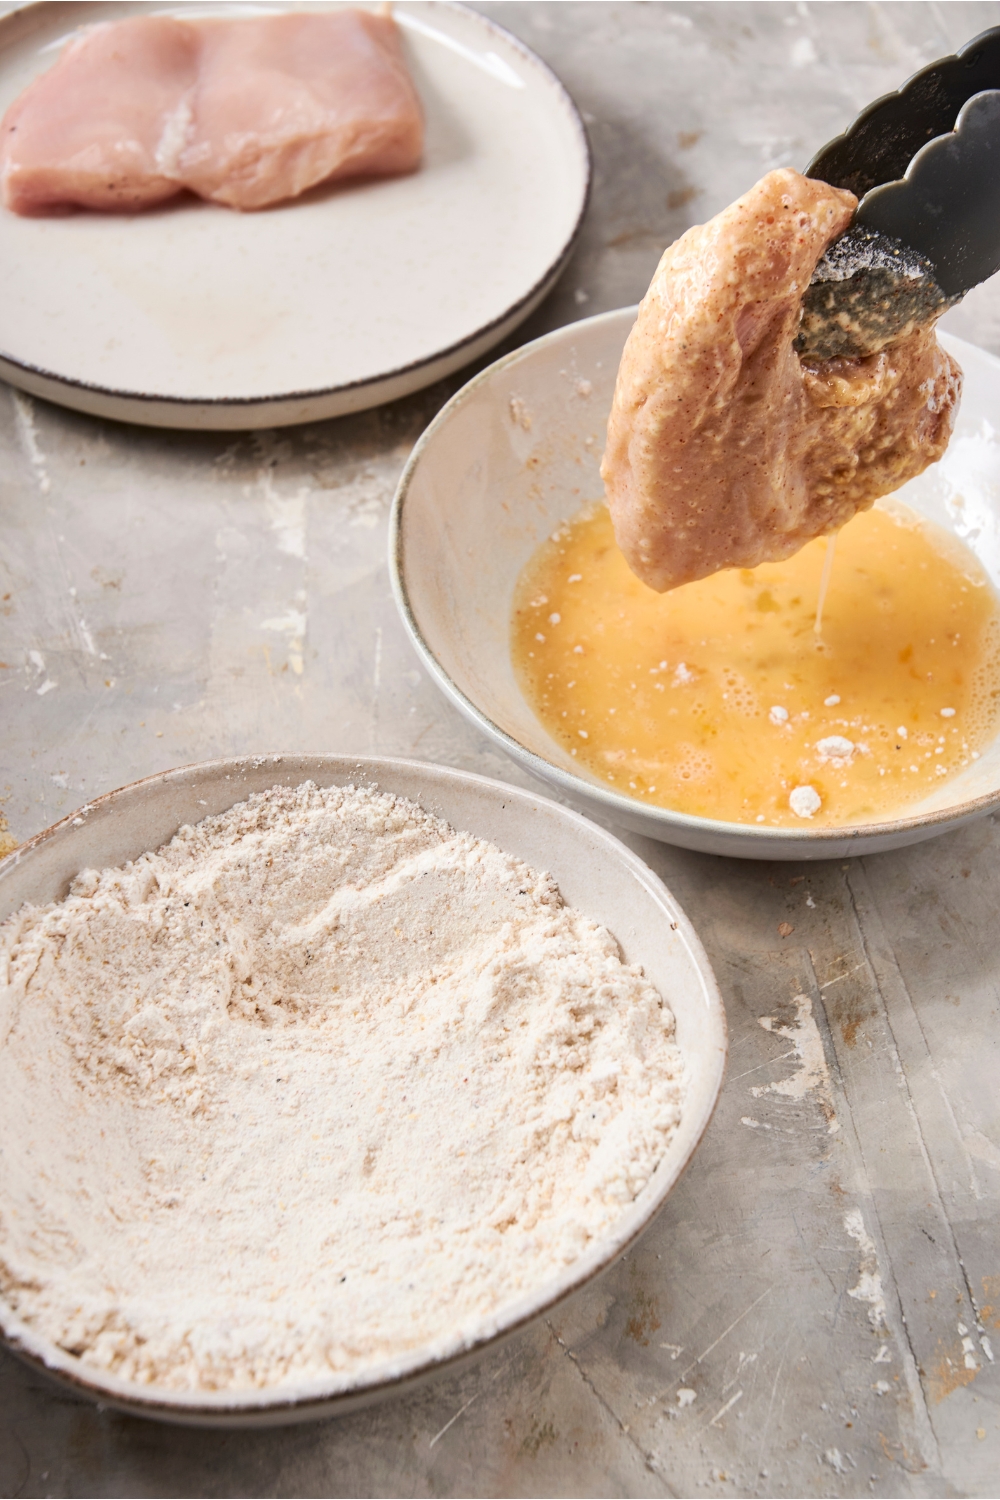 Someone dredges a chicken breast in egg wash. A shallow bowl of flour mixture is nearby.